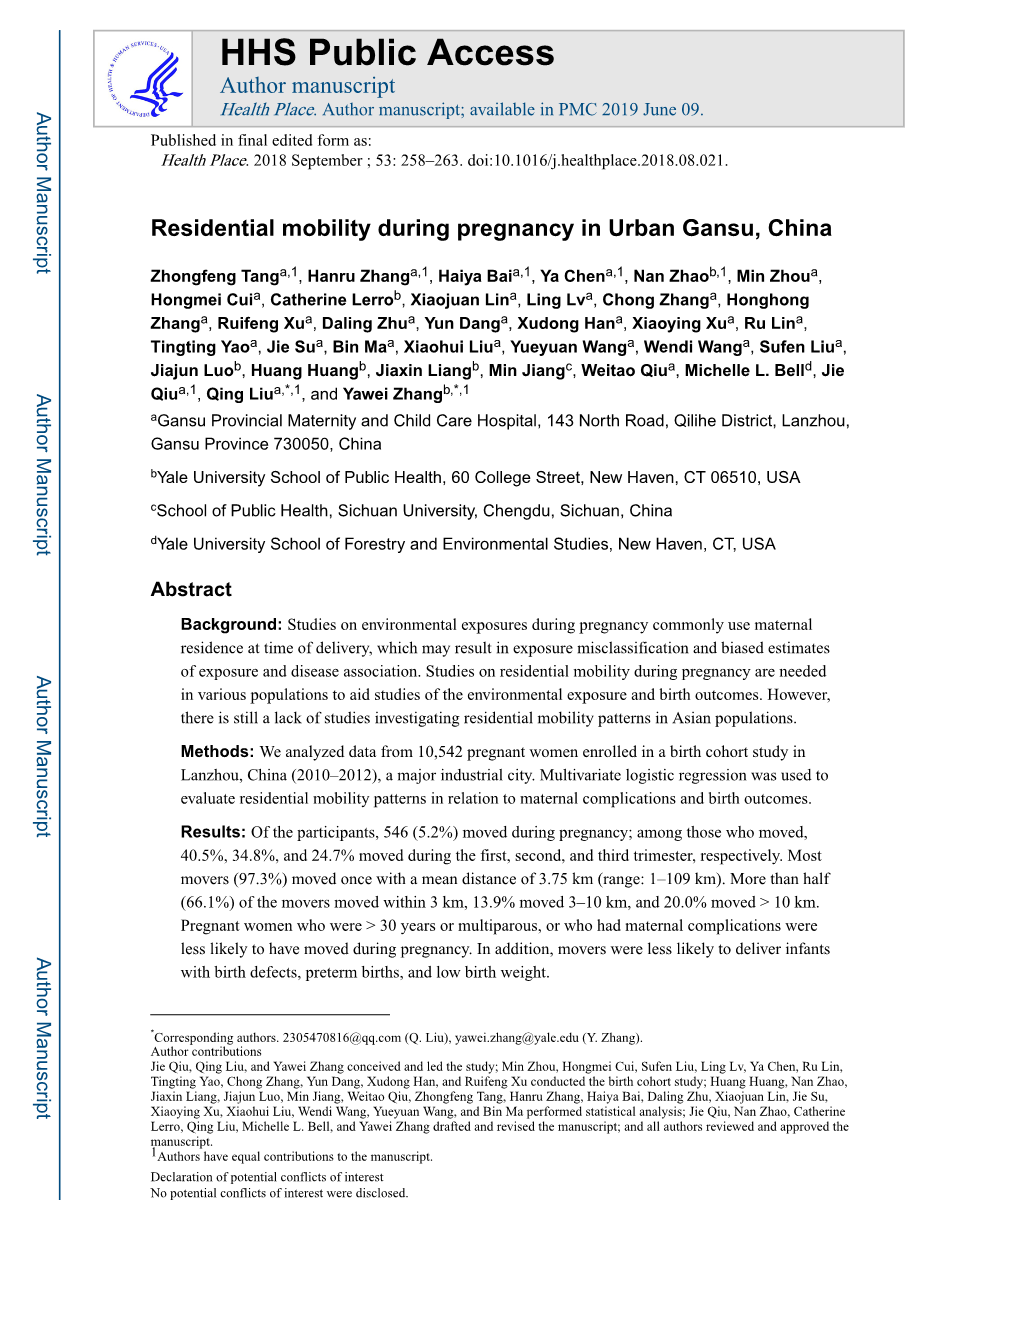 Residential Mobility During Pregnancy in Urban Gansu, China